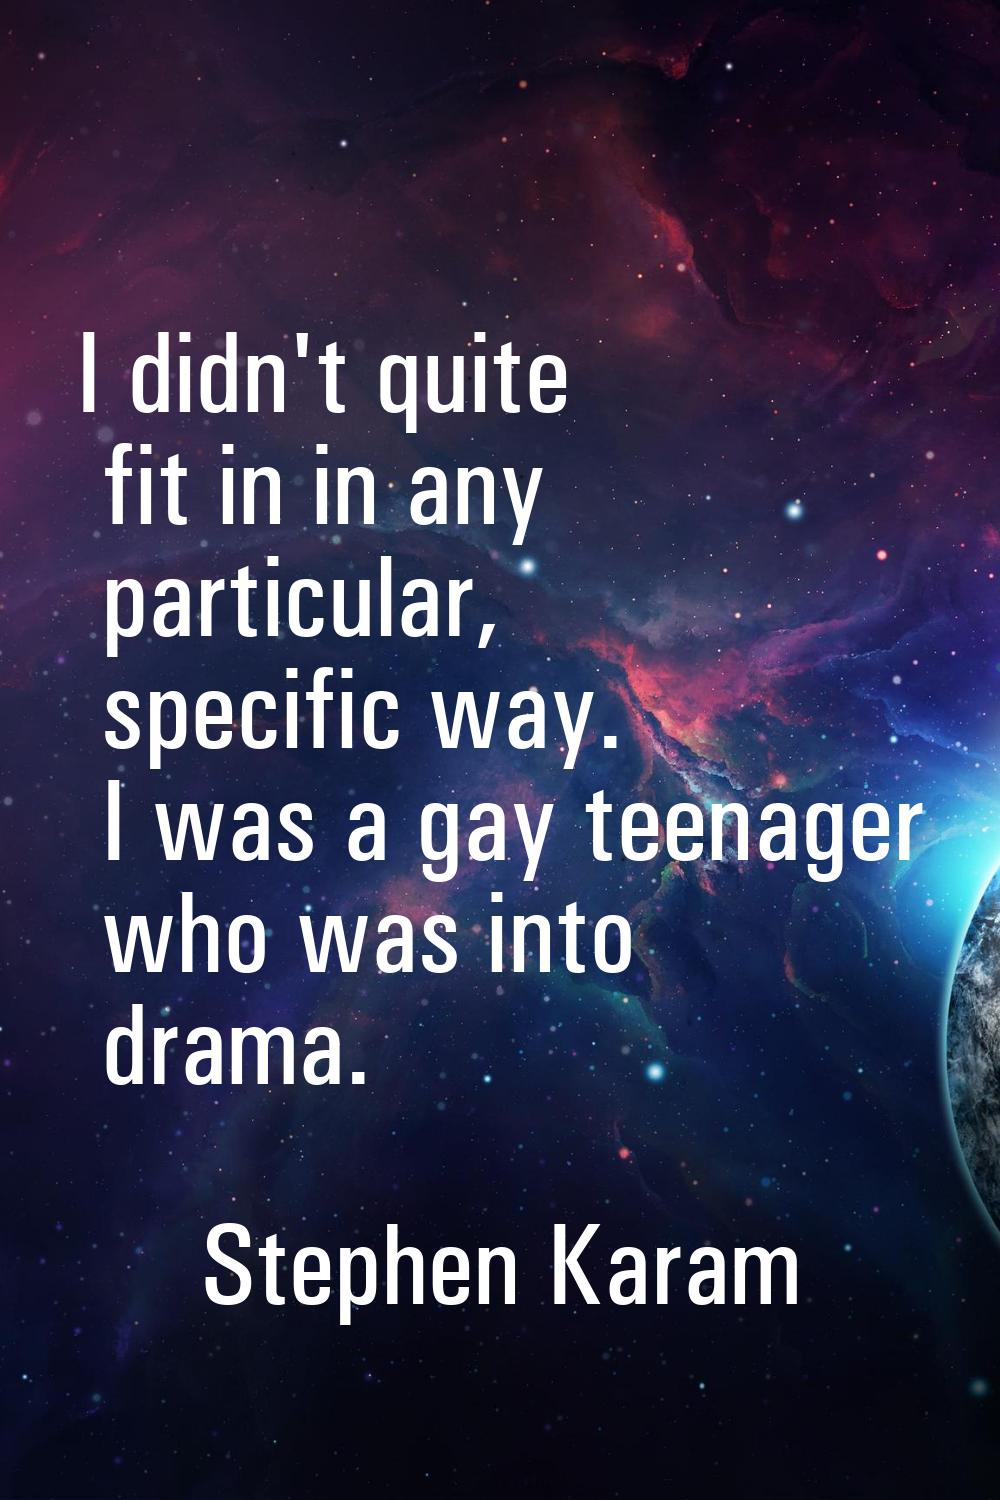 I didn't quite fit in in any particular, specific way. I was a gay teenager who was into drama.